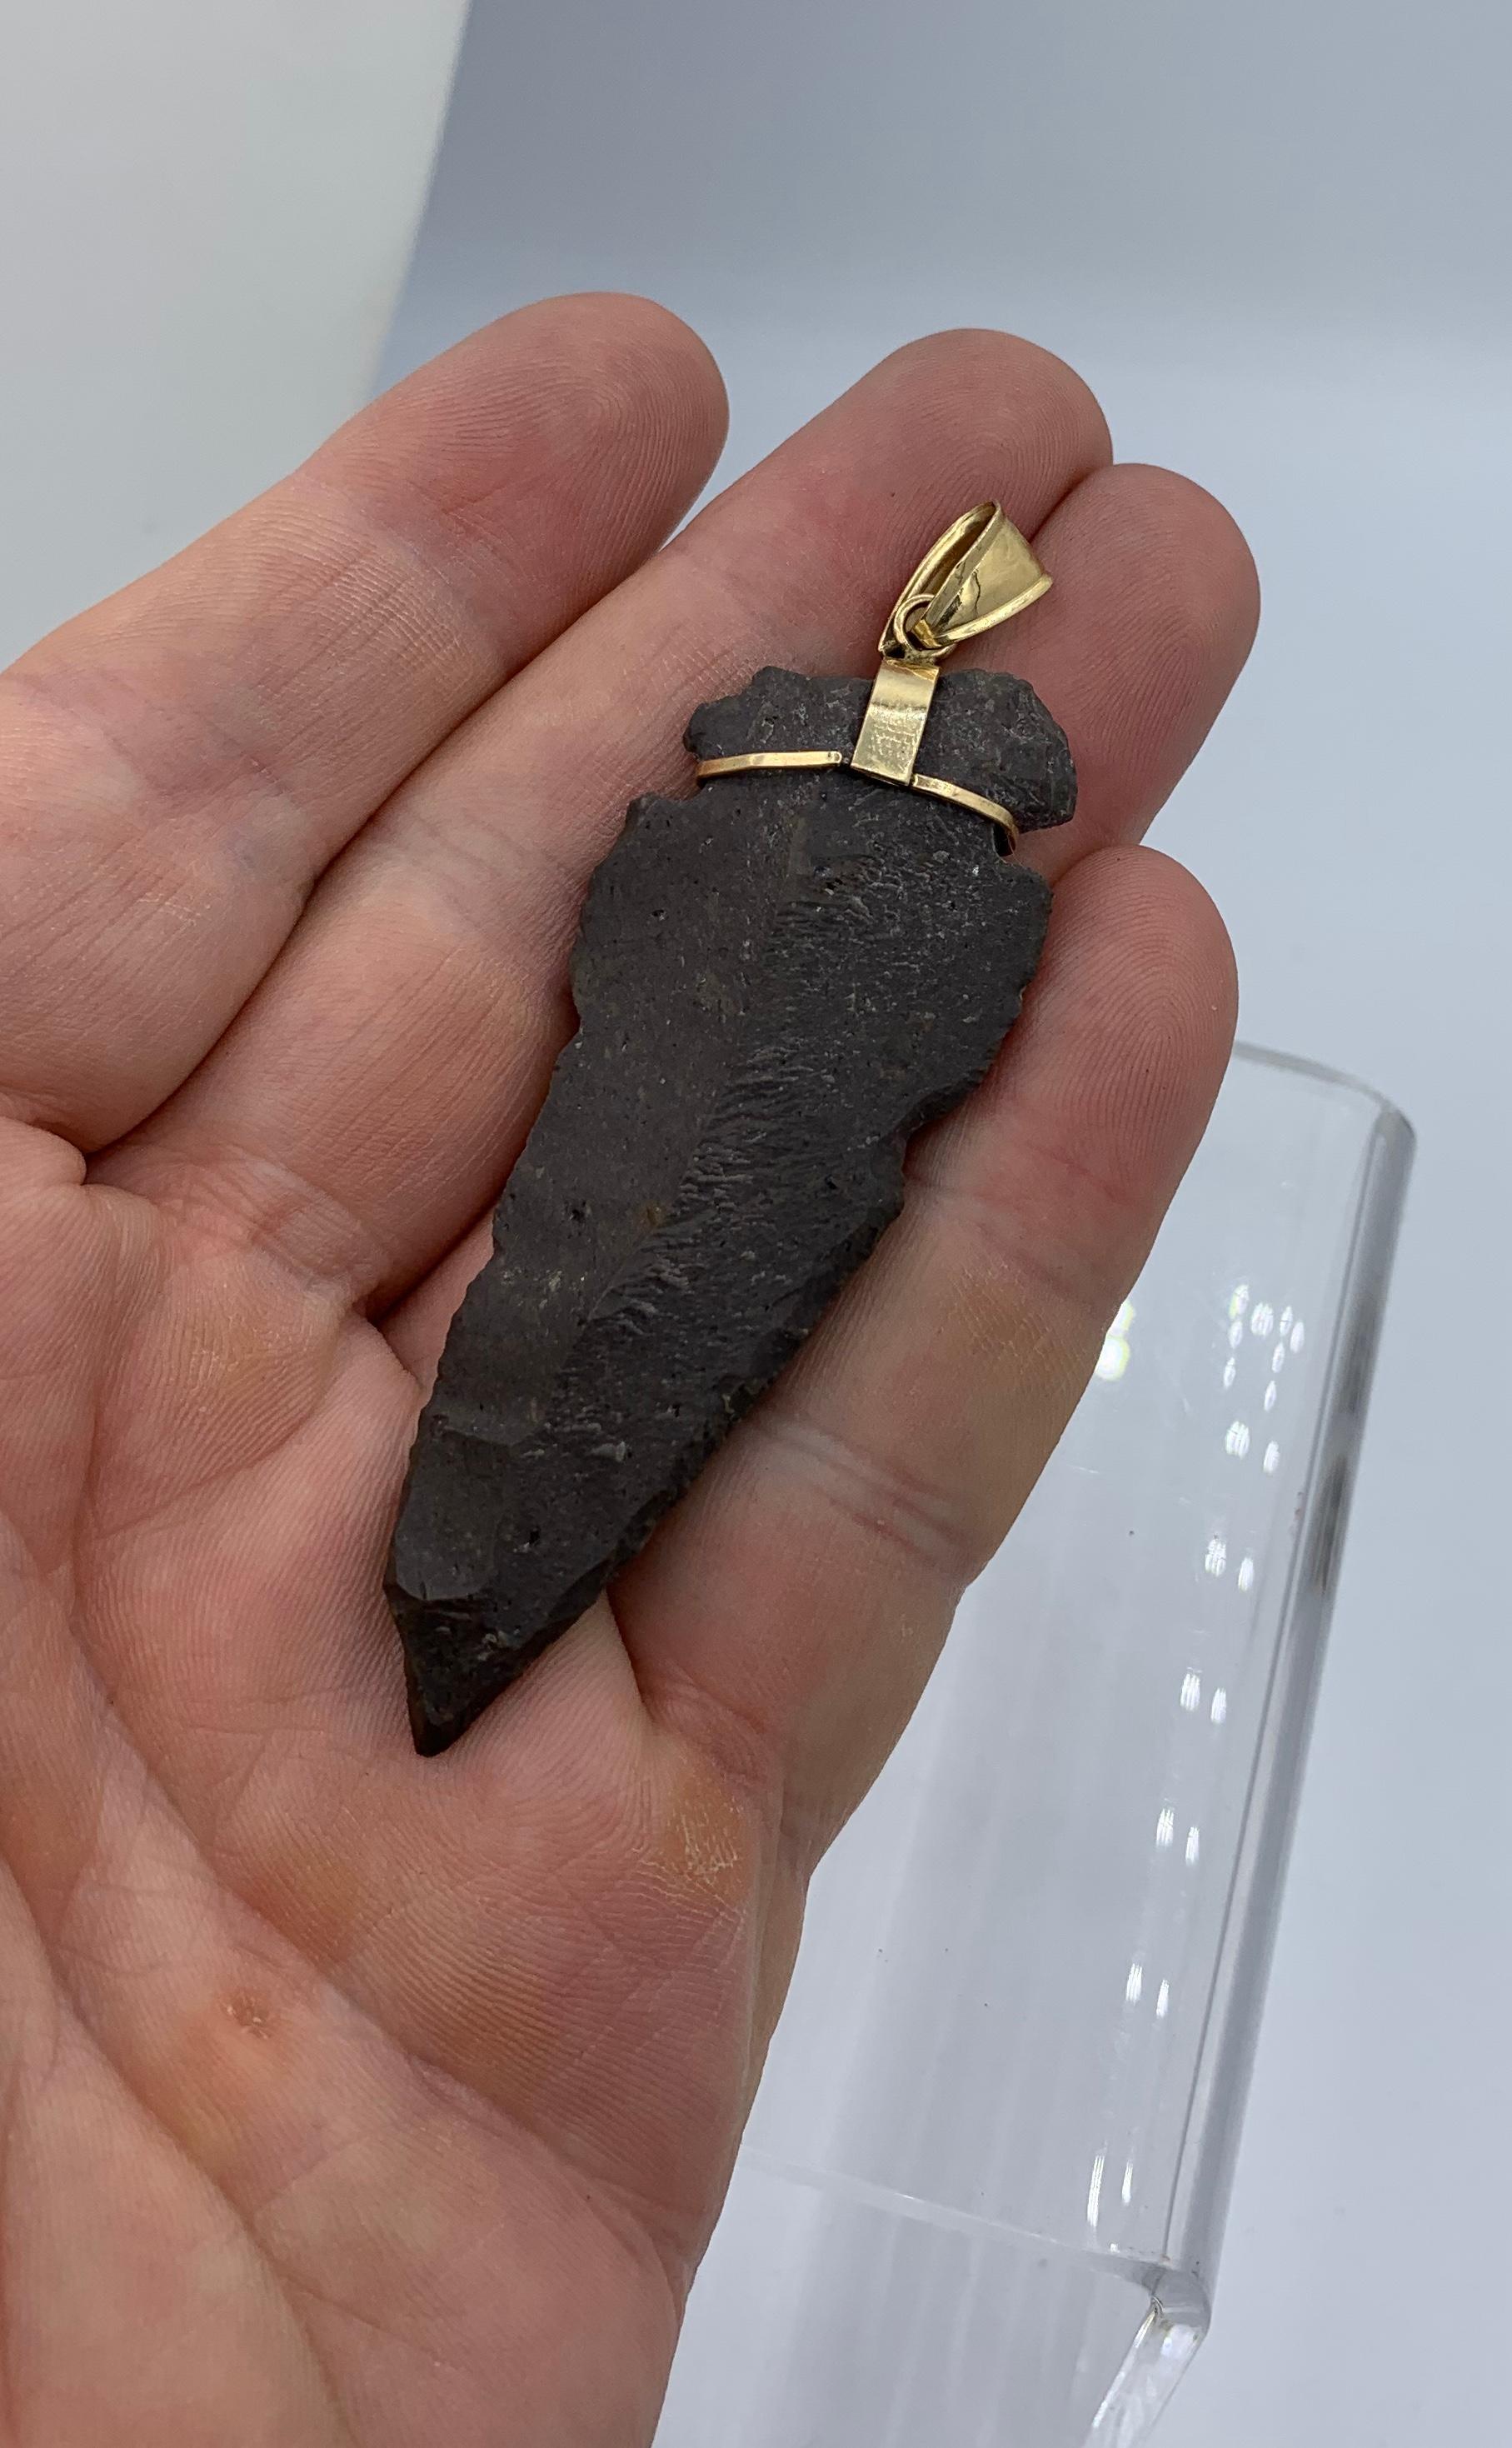 Native American Arrowhead 14 Karat Gold Pendant Necklace In Good Condition For Sale In New York, NY